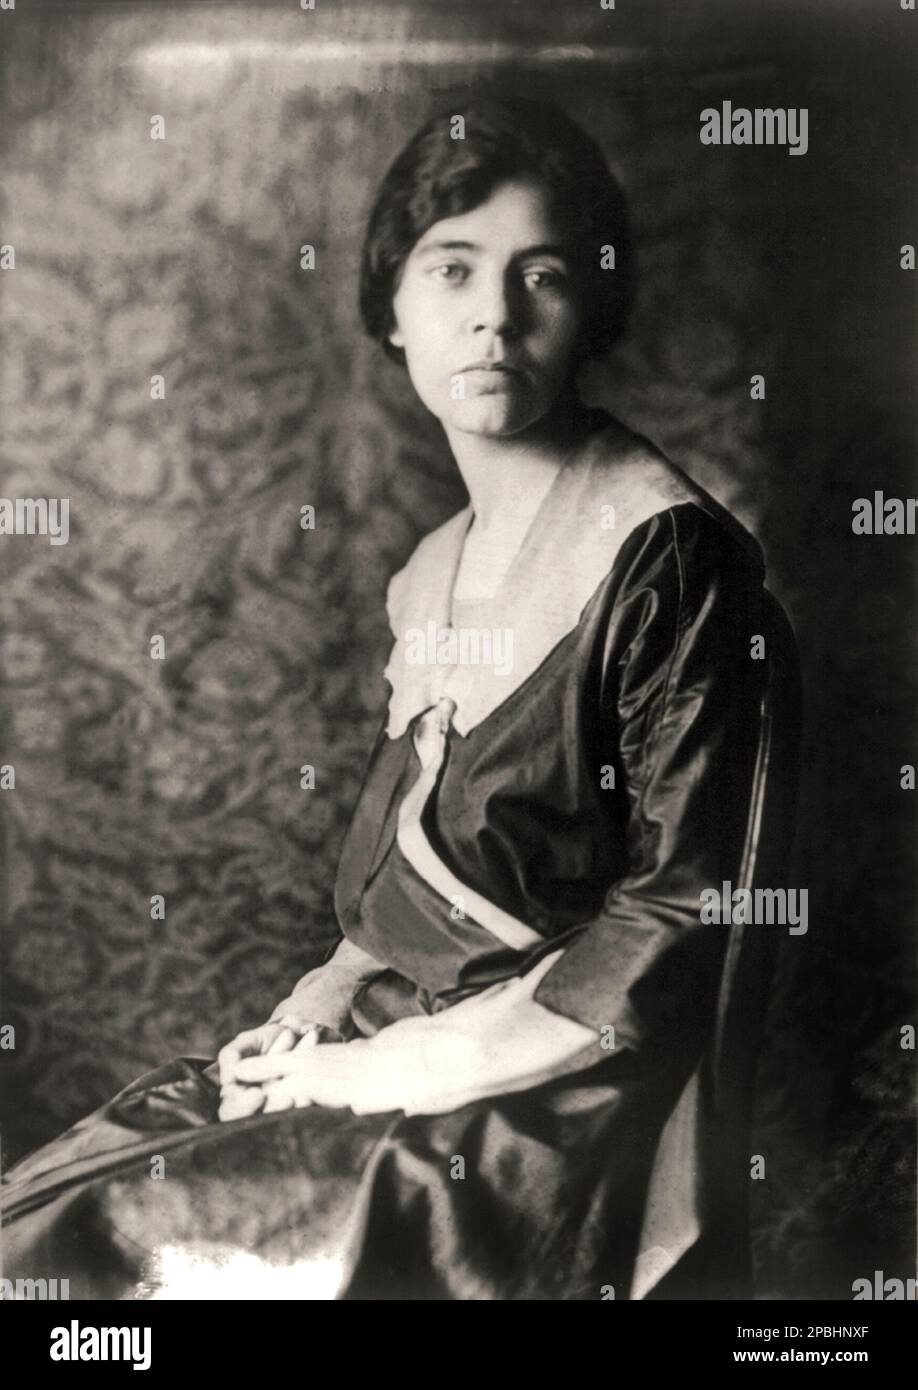 1918 , Washington , USA :  The suffragist ALICE Stokes  PAUL ( 1885 – 1977 ) was an American suffragist leader. Along with Lucy Burns (a close friend) and others, she led a successful campaign for women's suffrage that resulted in the passage of the Nineteenth Amendment to the U.S. Constitution in 1920. - SUFFRAGETTA - sufraggetta - Sufragist - POLITICO - POLITICIAN - POLITICA - POLITIC - FEMMINISMO - FEMMINISTA  - FEMMINISTE - SUFFRAGETTE - USA - ritratto - portrait  - FEMMINISM - FEMMINIST - SUFFRAGIO UNIVERSALE - VOTO POLITICO ALLE DONNE - FASHION - MODA  - ANNI DIECI - 1910's - 10's - '10 Stock Photo